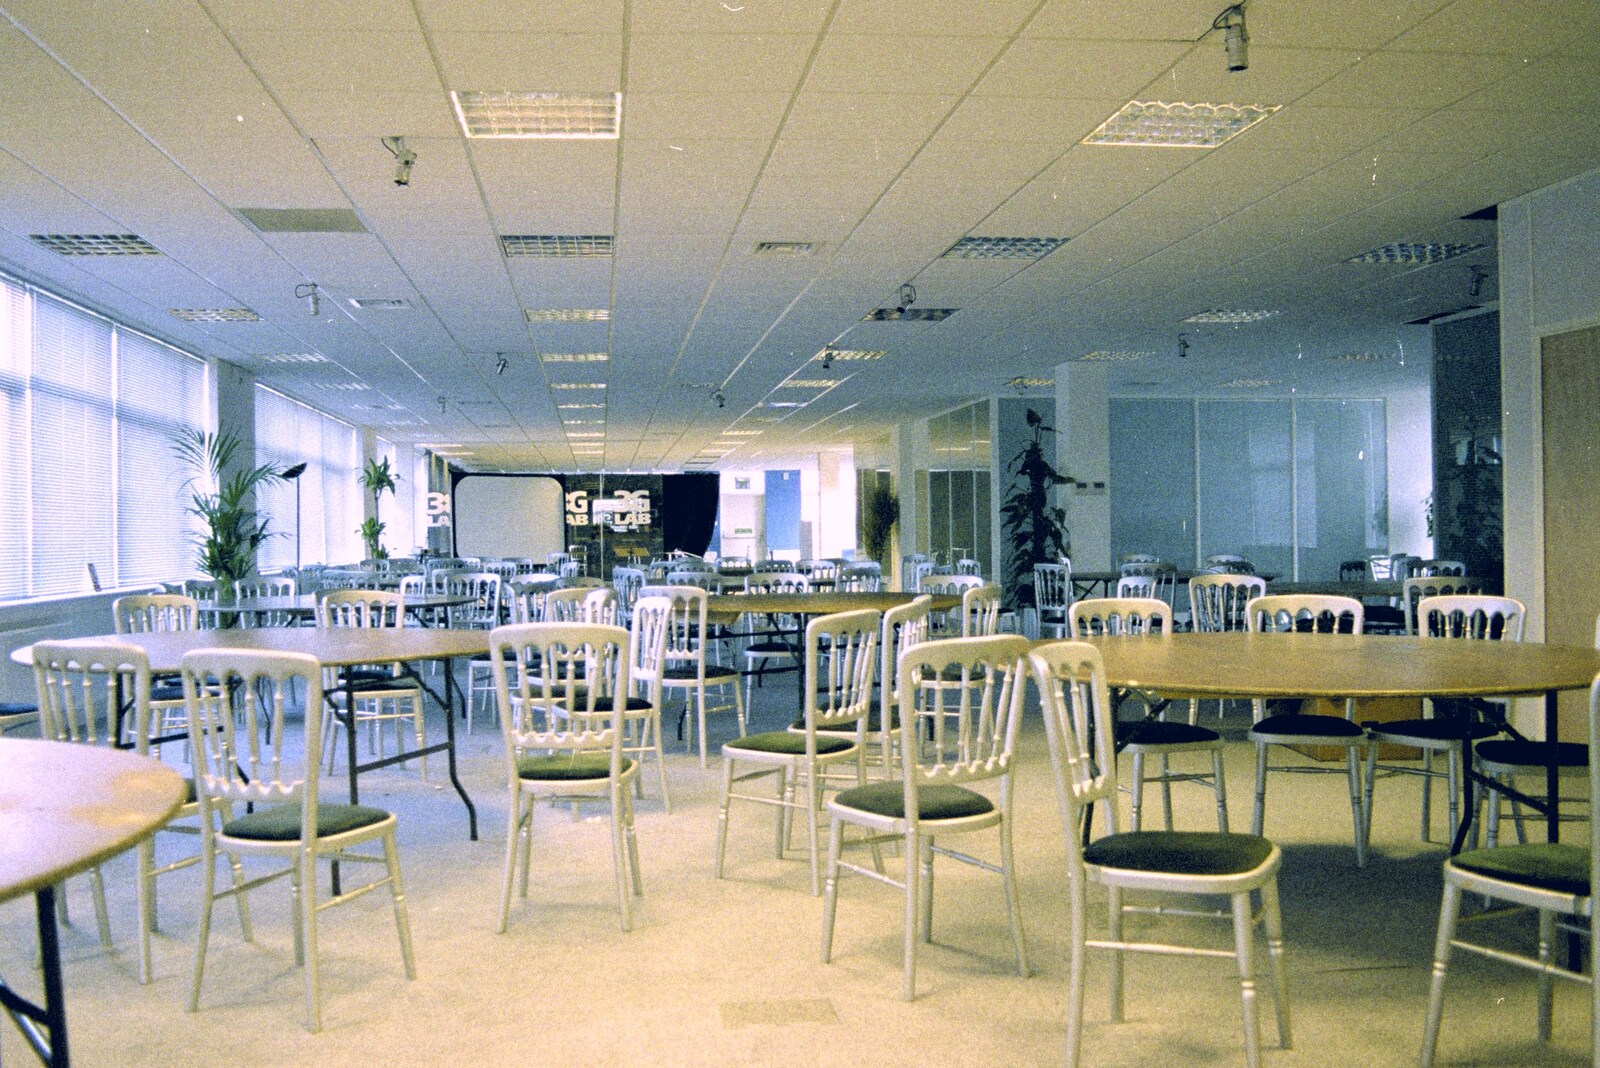 The office is done up with restaurant tables from 3G Lab Moves Offices, Milton Road, Cambourne and Cambridge - 27th August 2001